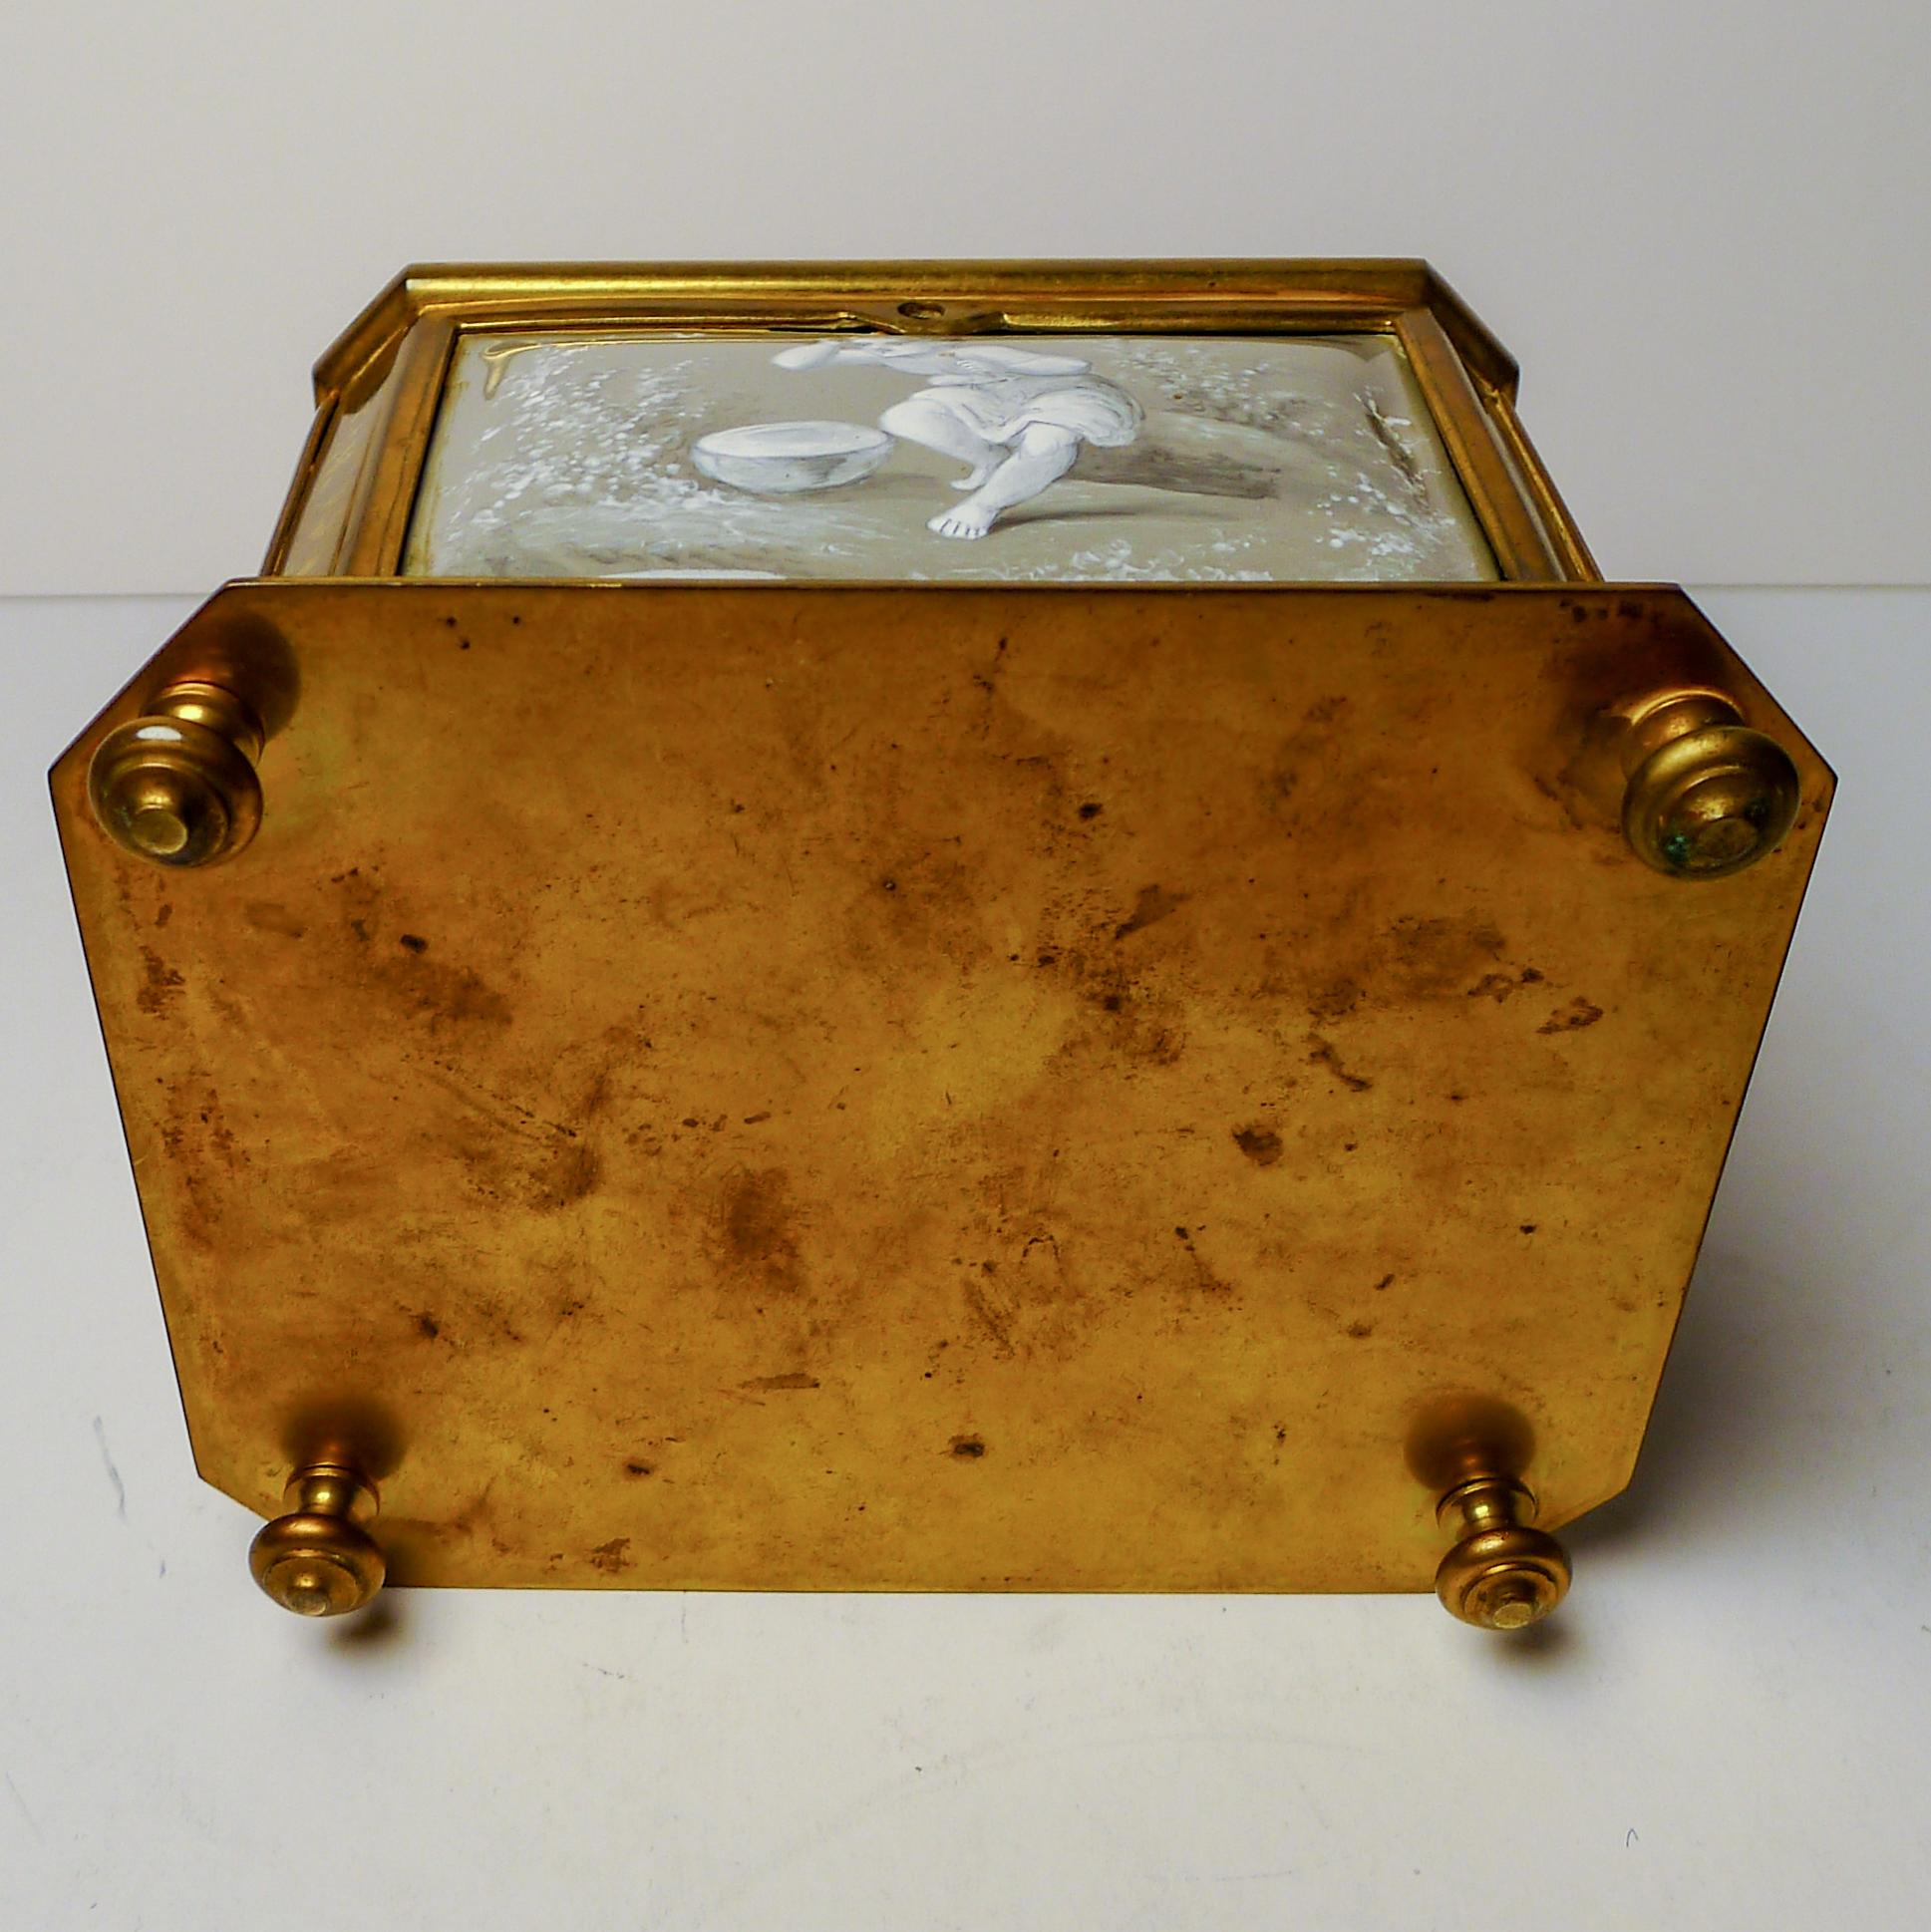 Antique French Limoges Enamel Jewelry Box C.1850 For Sale 3